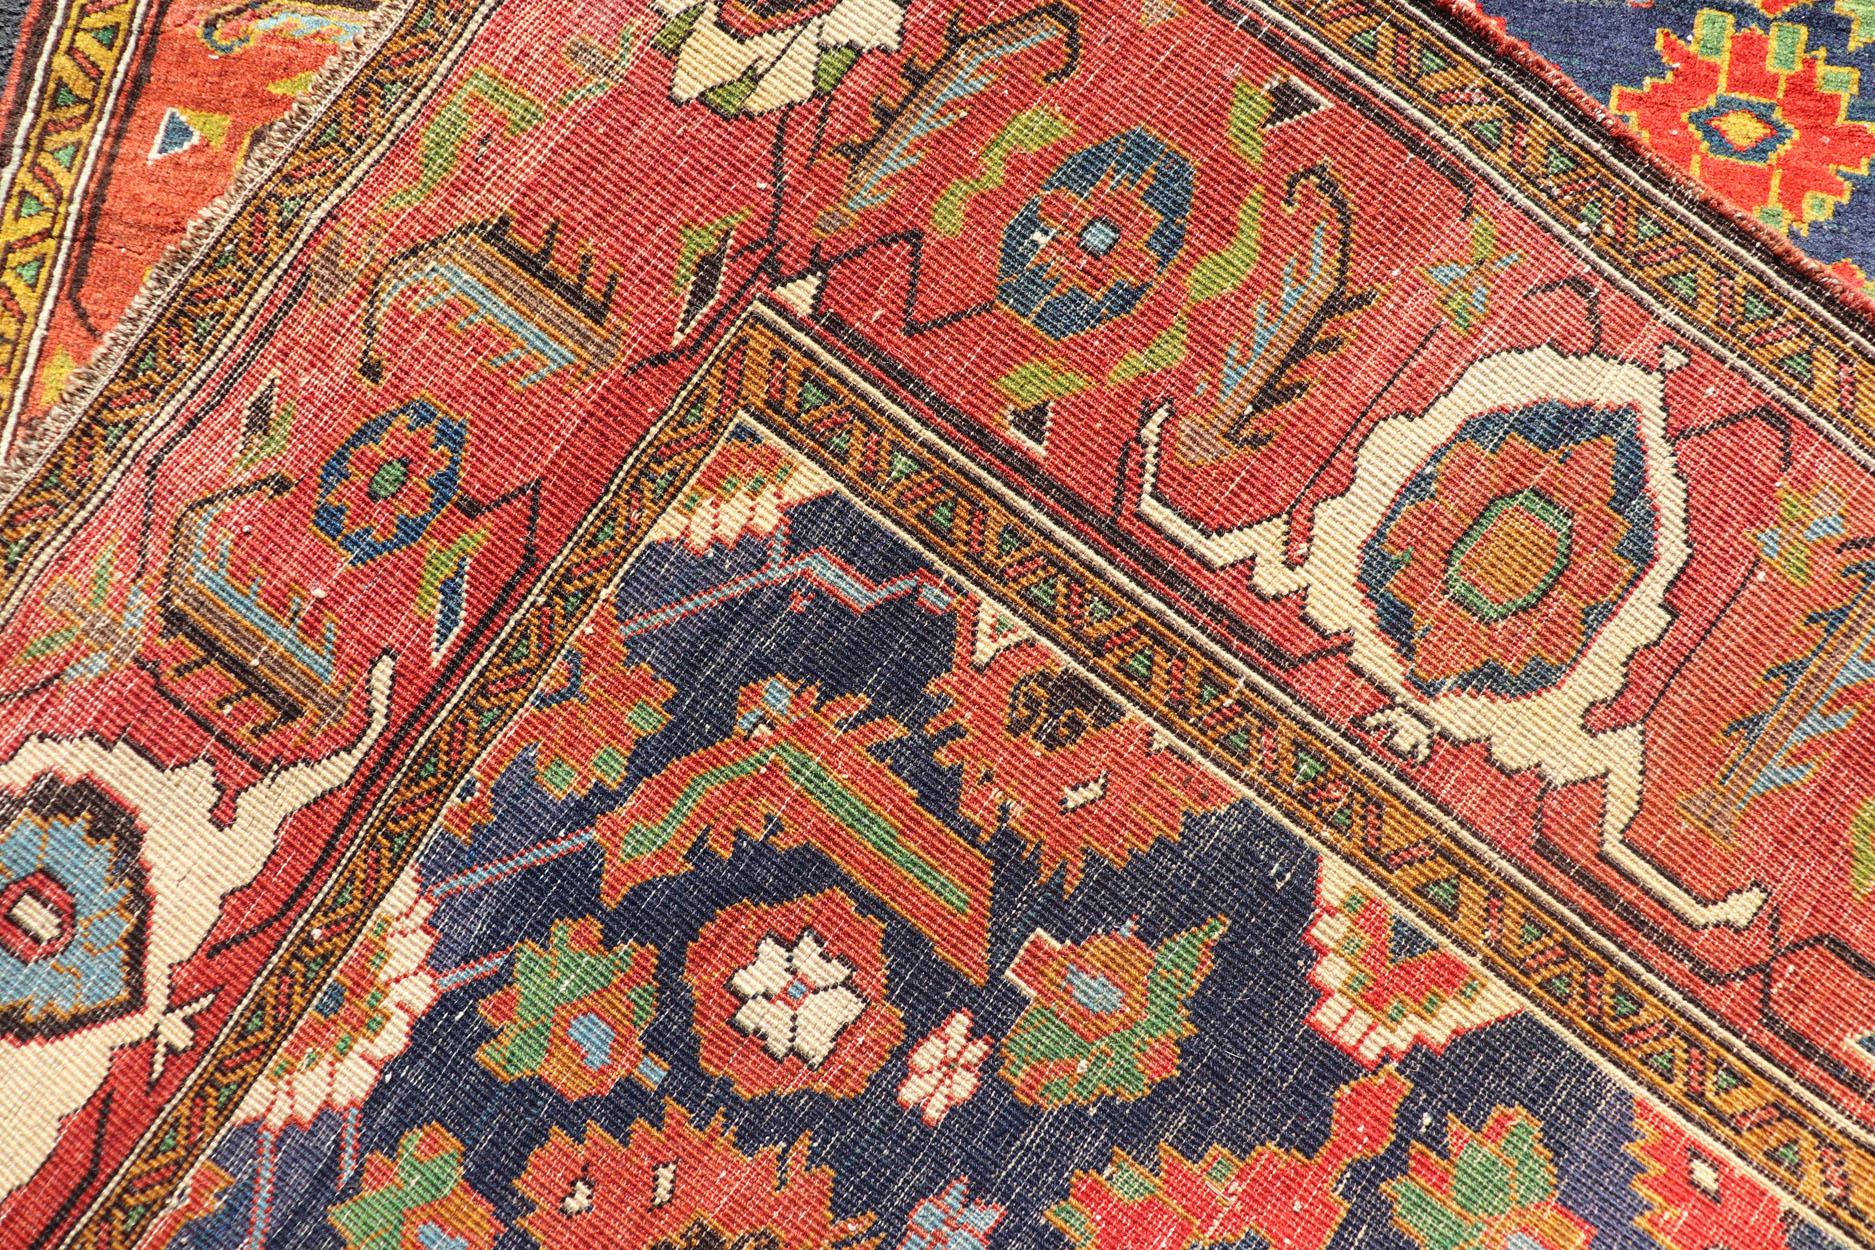 Antique Caucasian Rug with All-Over Design in Royal Blue Field, Soft Red & Green For Sale 5